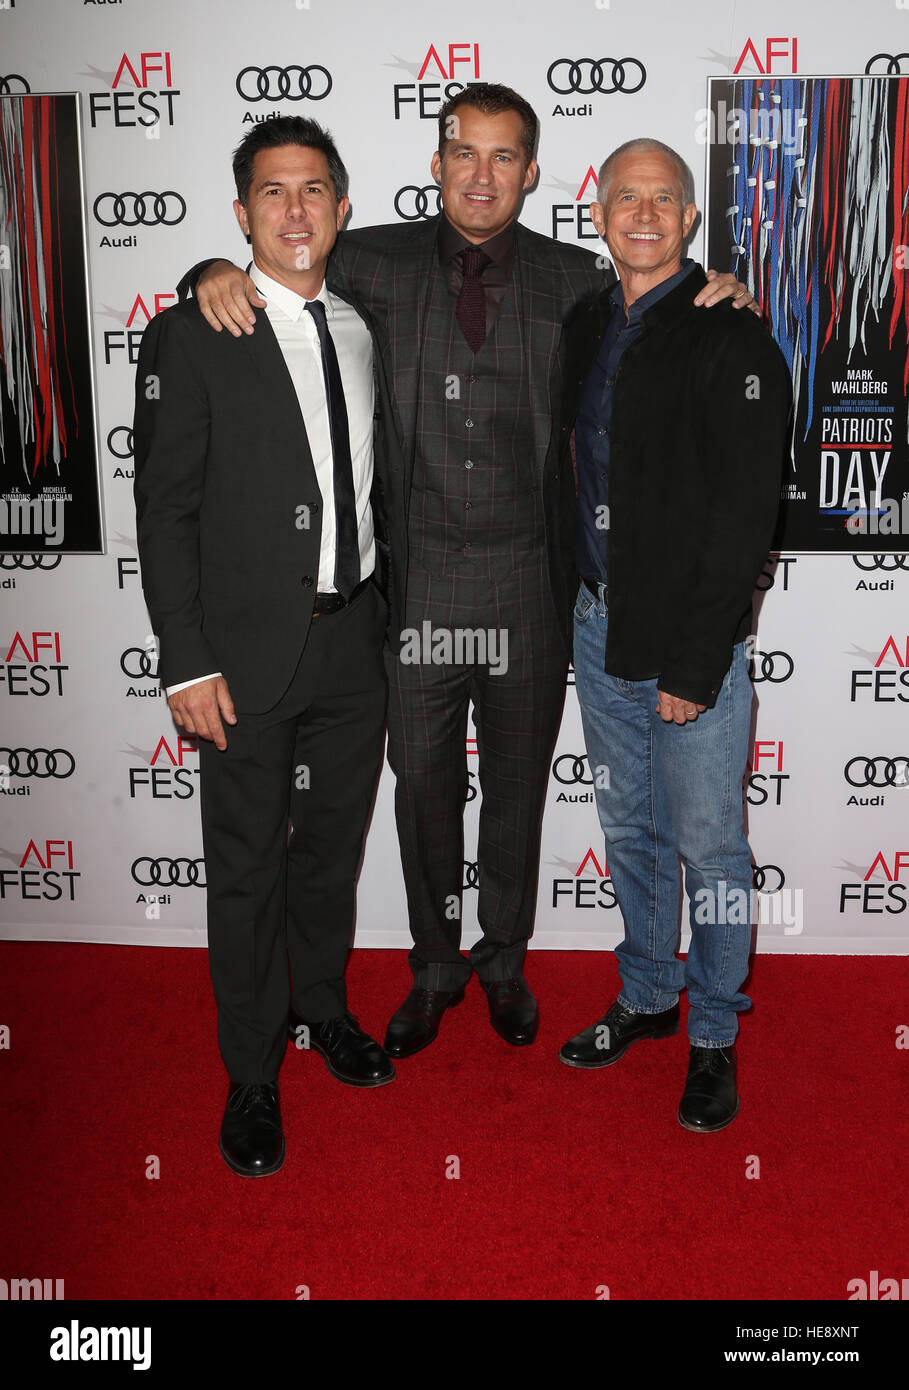 AFI FEST 2016 - Closing Gala - Premiere Of 'Patriot's Day'  Featuring: Dylan Clark, Scott Stuber, Hutch Parker Where: Hollywood, California, United States When: 17 Nov 2016 Stock Photo